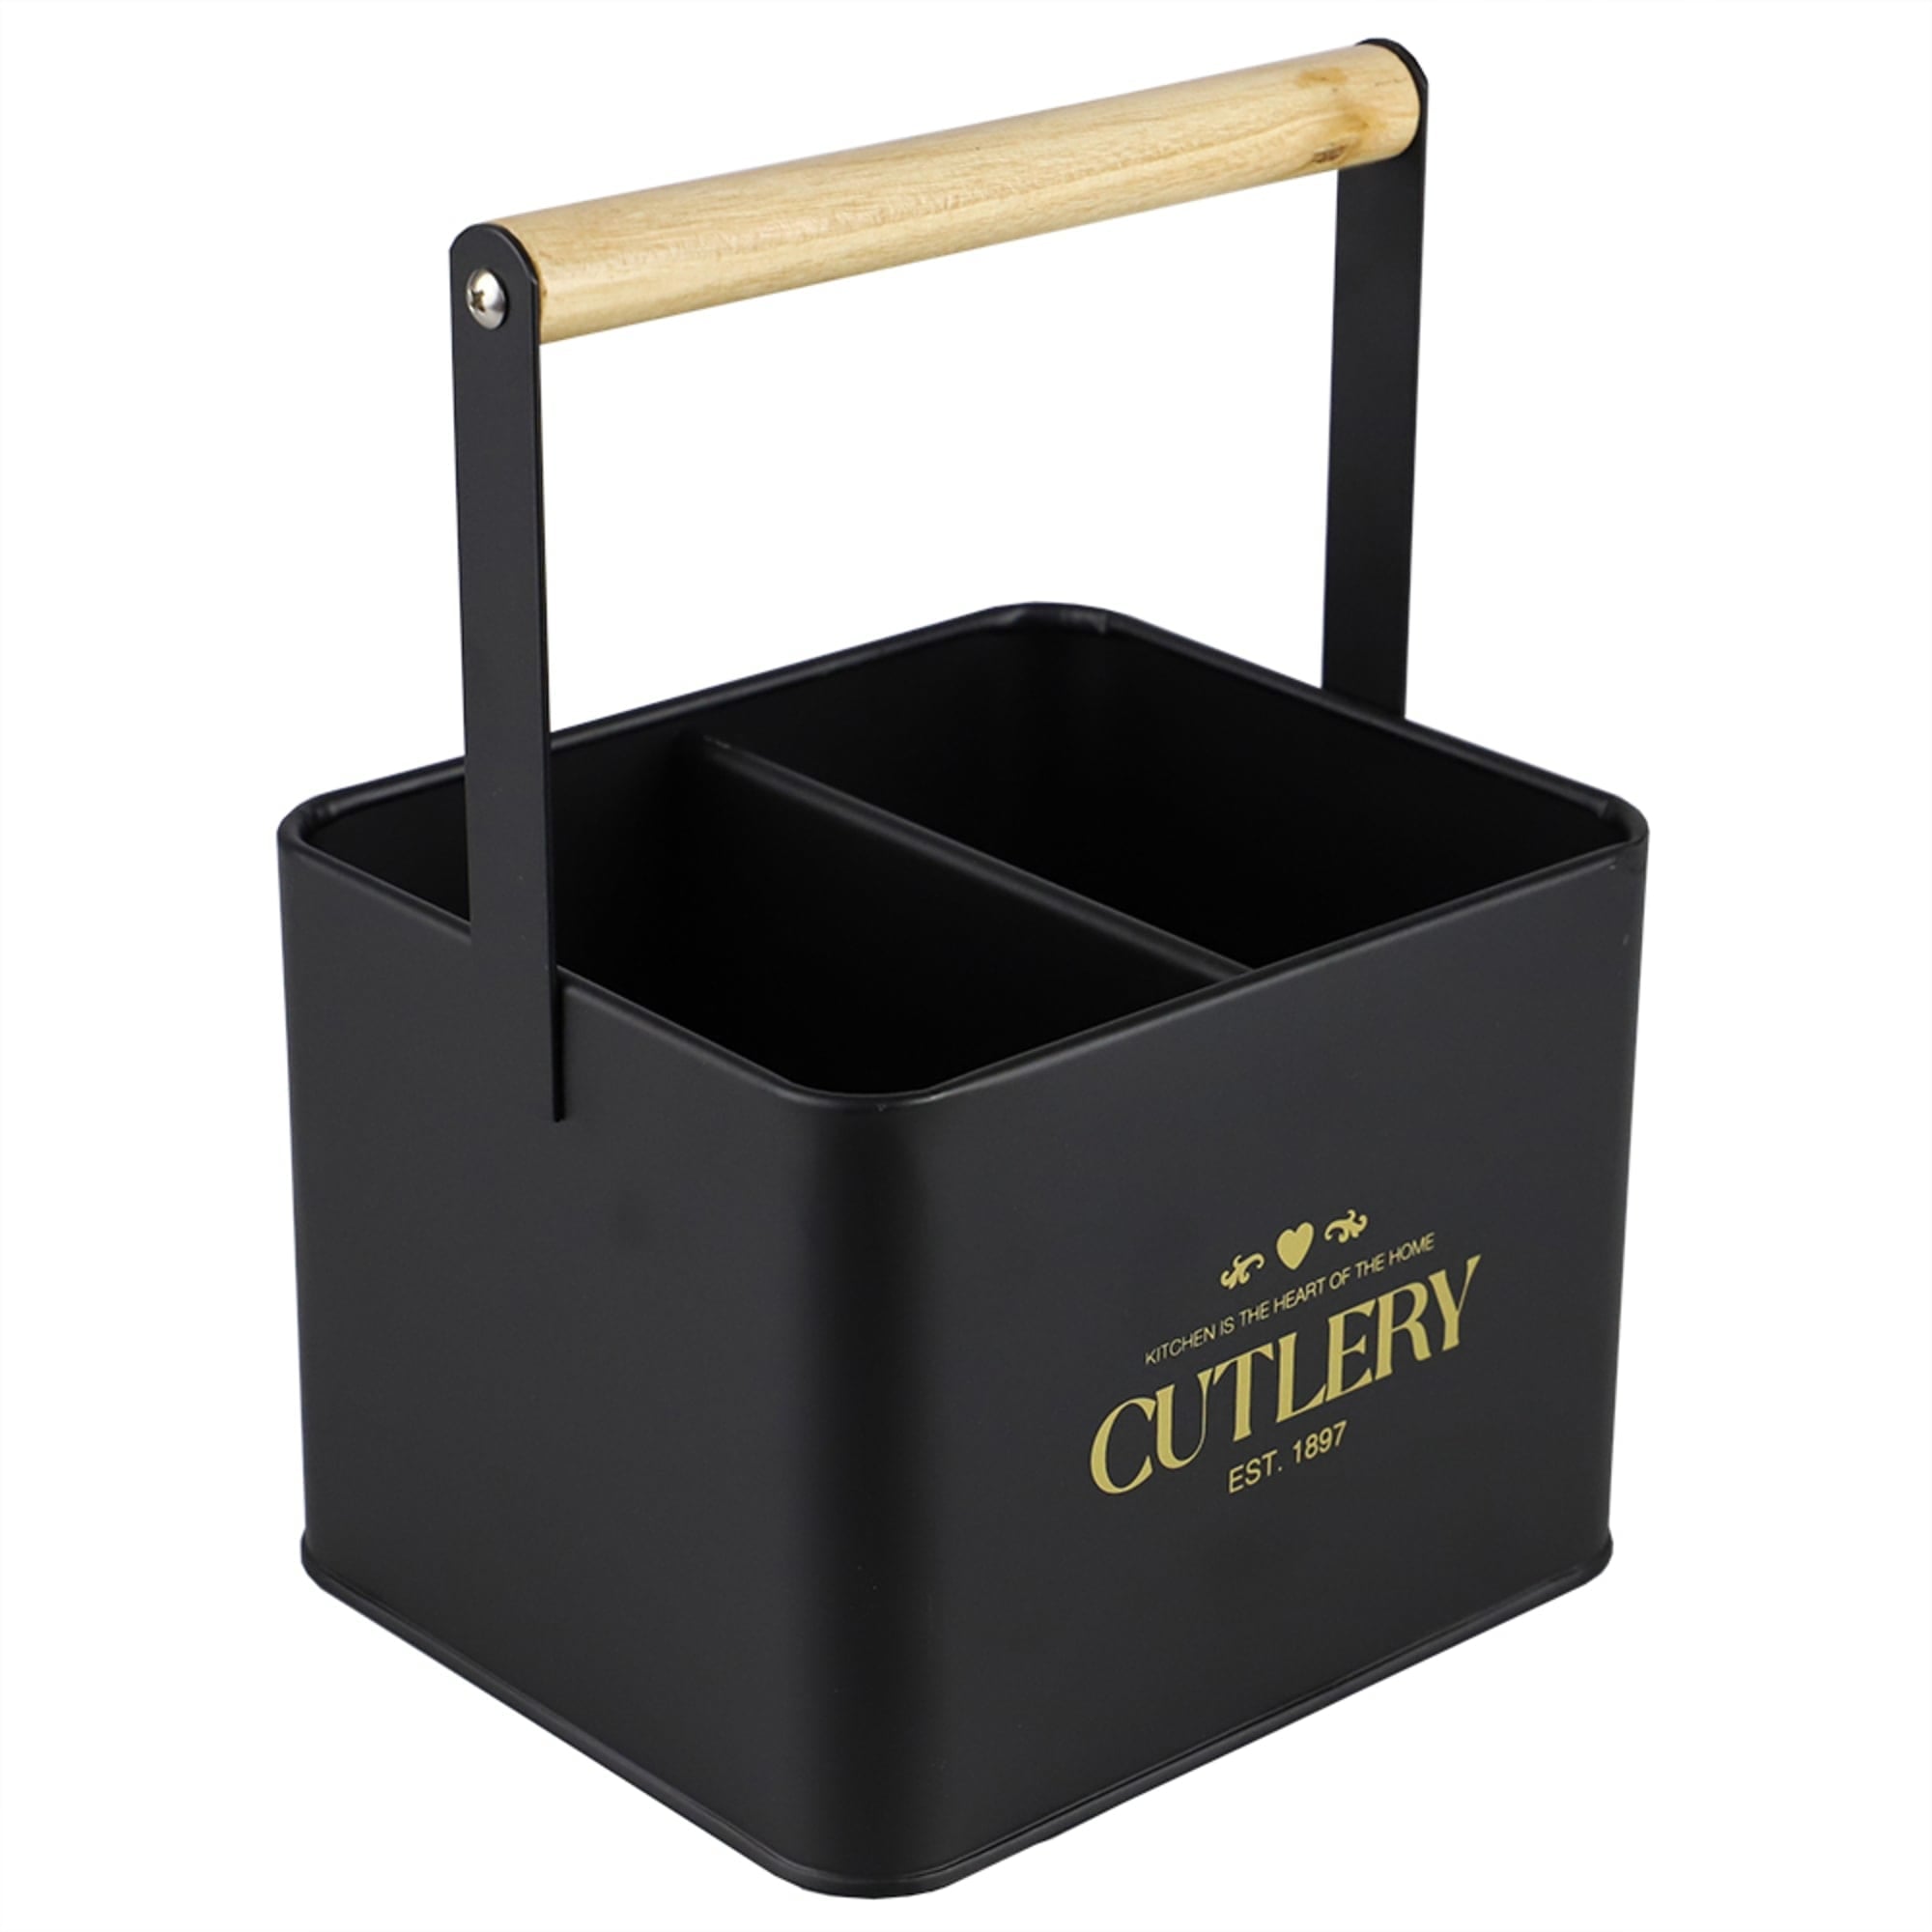 Home Basics Bistro Sectioned Tin Holder with Bamboo Handle, Black $8.00 EACH, CASE PACK OF 6